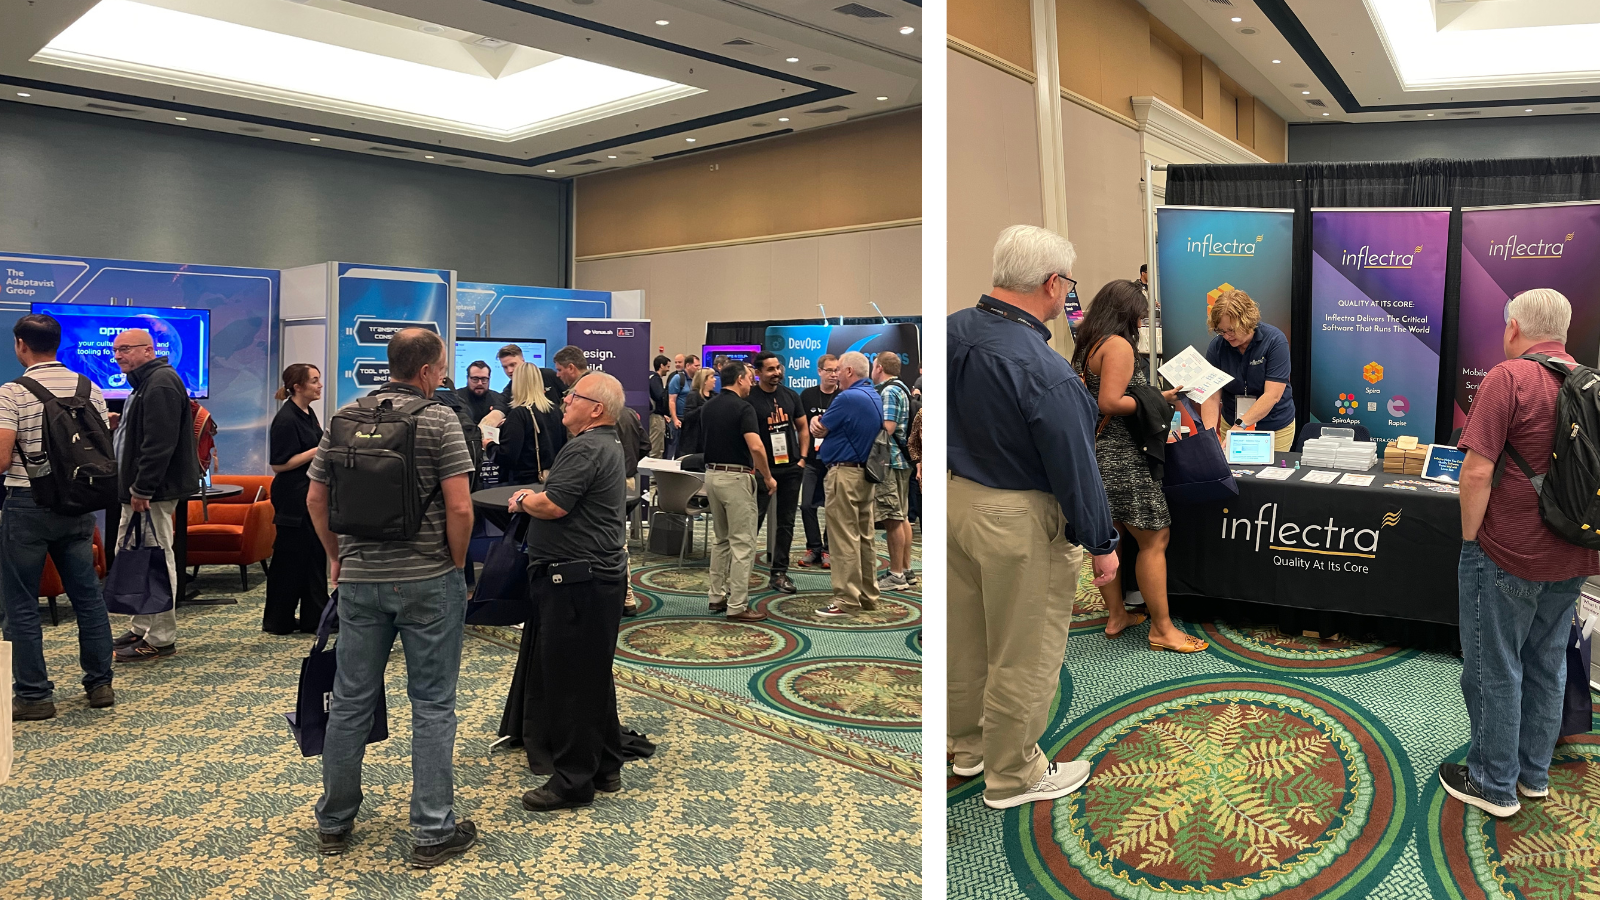 photo-collage-of-inflectra-at-agile-devops-east-conference-crowd-view-on-left-booth-with-attendees-on-right-image